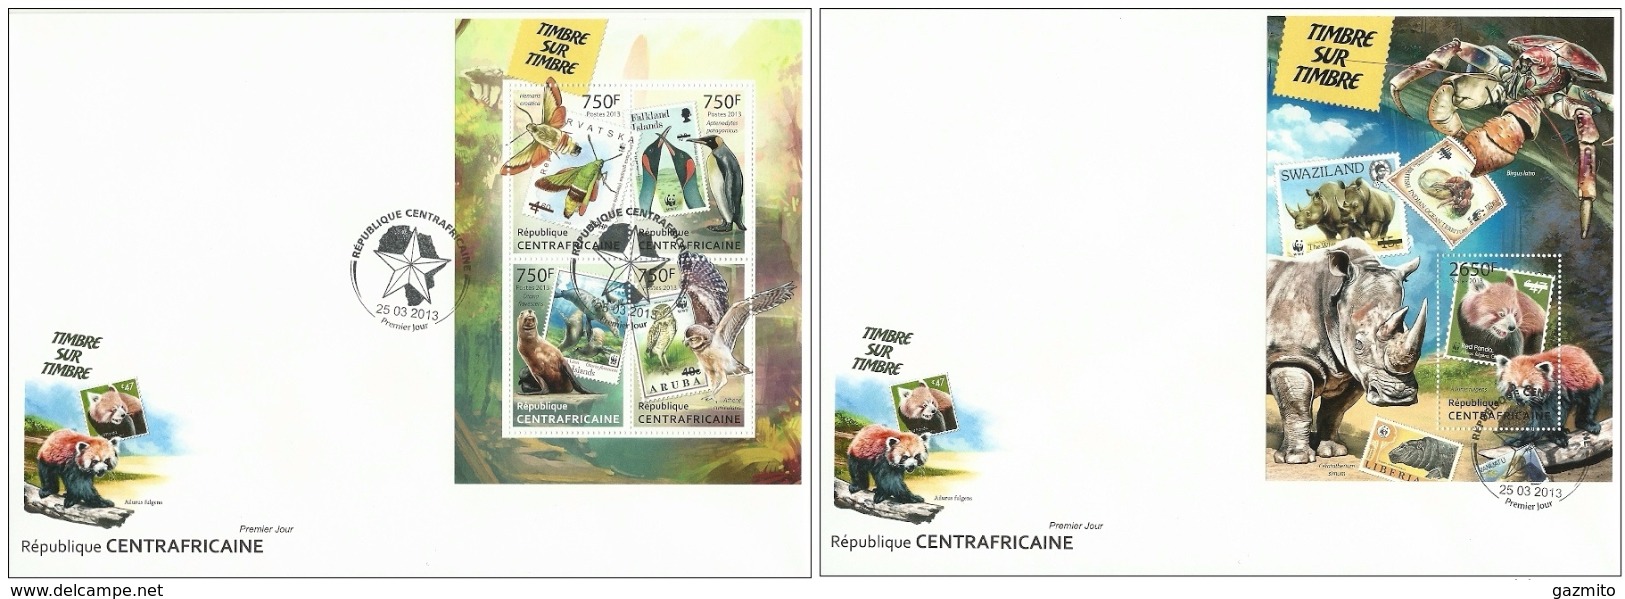 Centrafrica 2013, WWF On Stamps, Butterflies, Rhino, Dolphins, Penguins, Owl, 4val In BF +BF In 2FDC - FDC